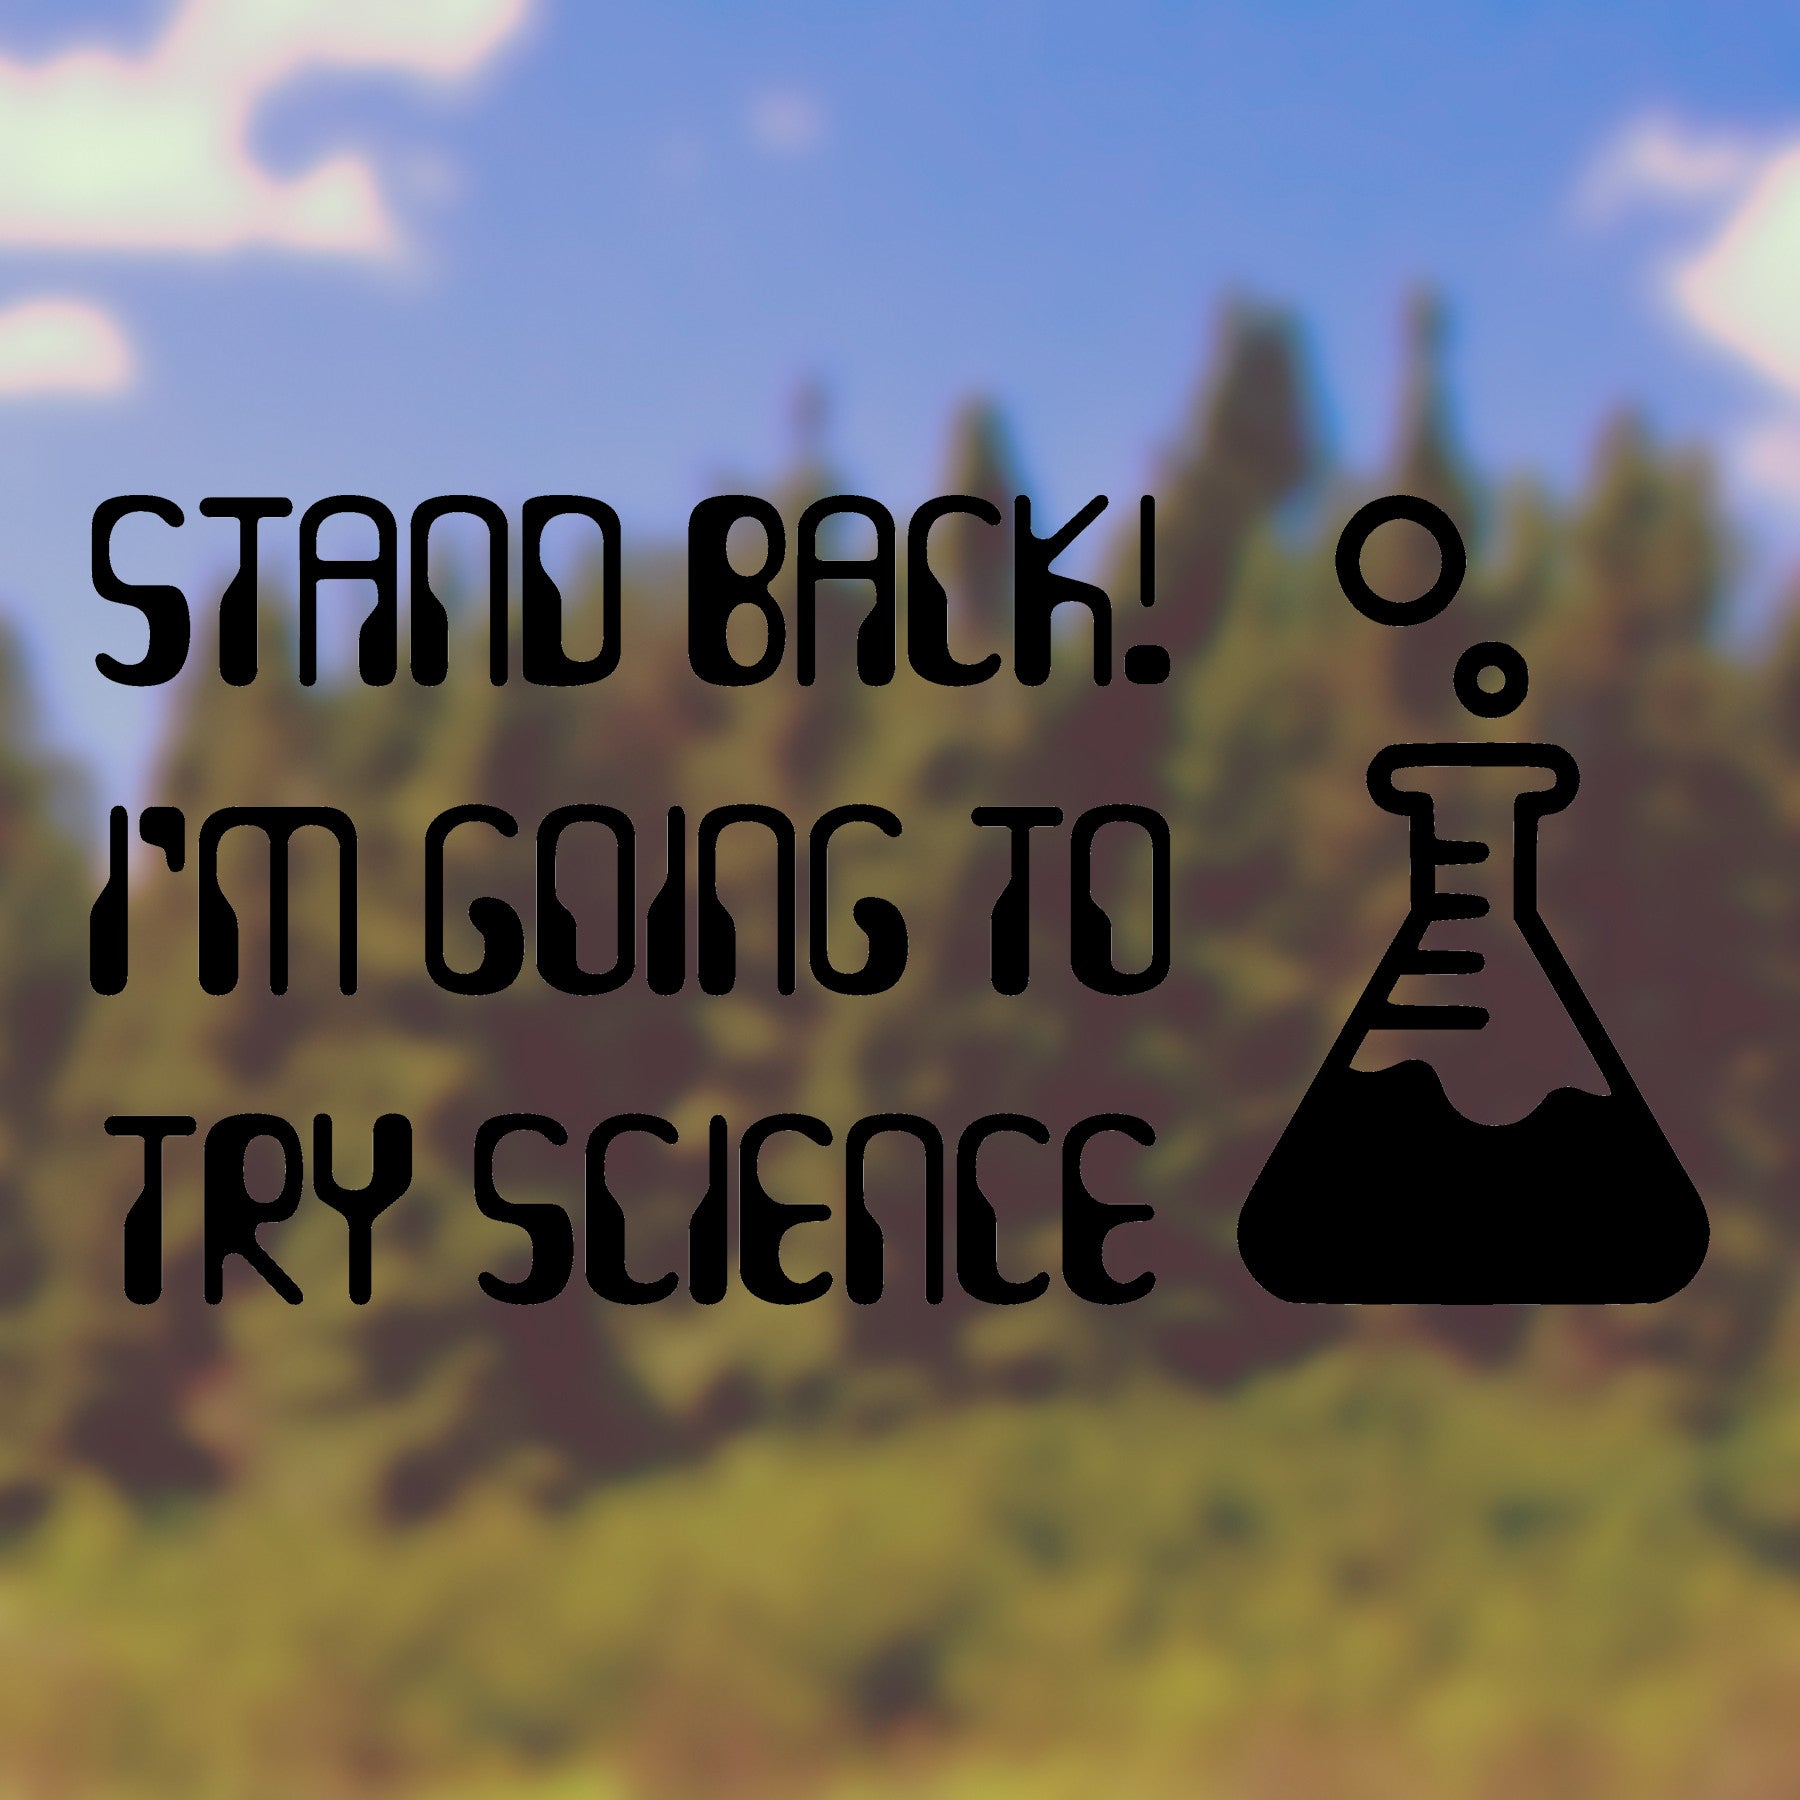 Stand back! I'm going to try science | Bumper sticker - Adnil Creations